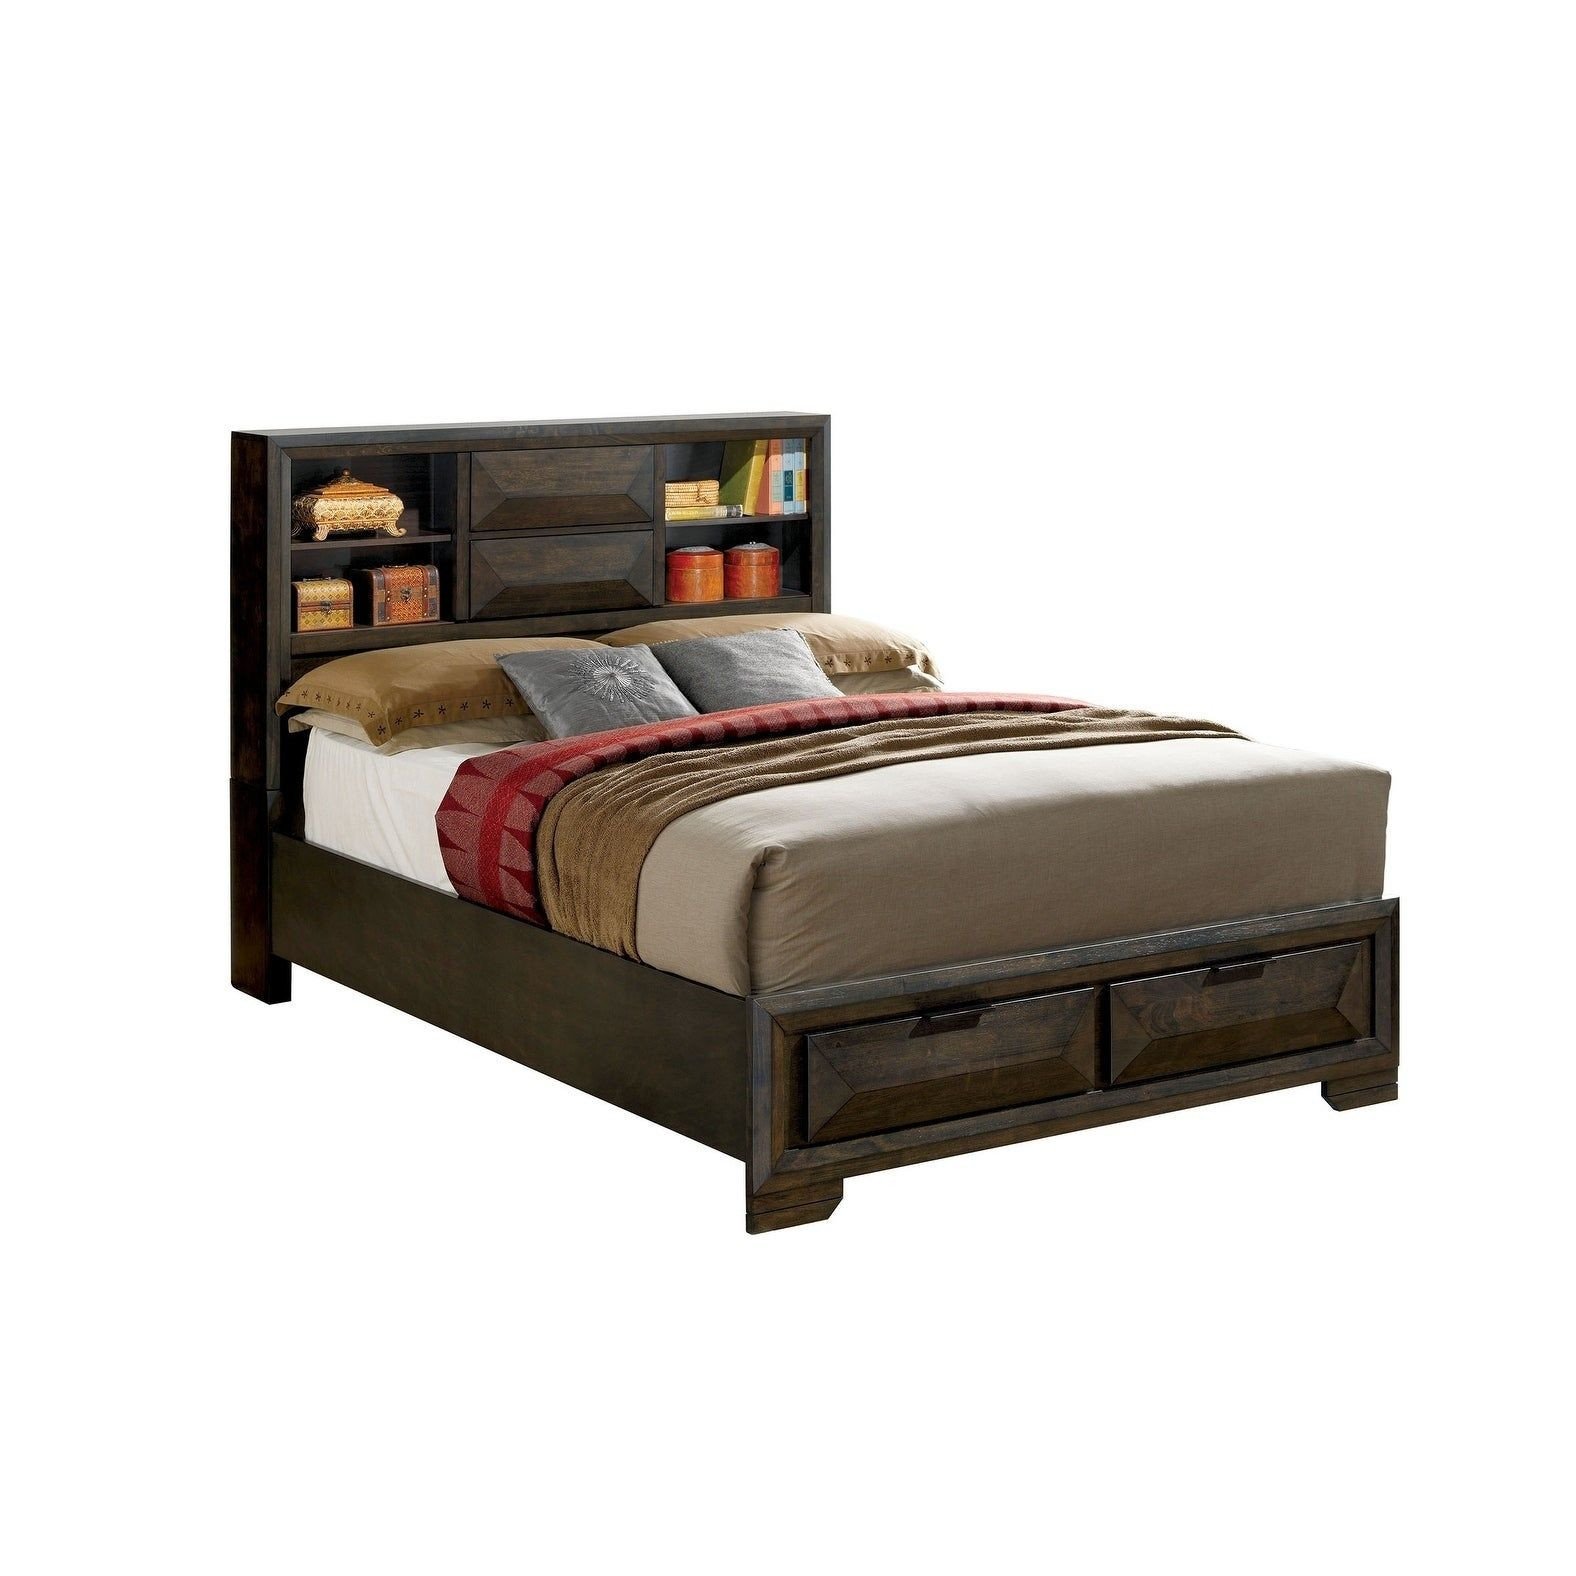 Cortina Sleigh Bedroom Set New Williams Home Furnishing Nikomedes C King Bed In Espresso